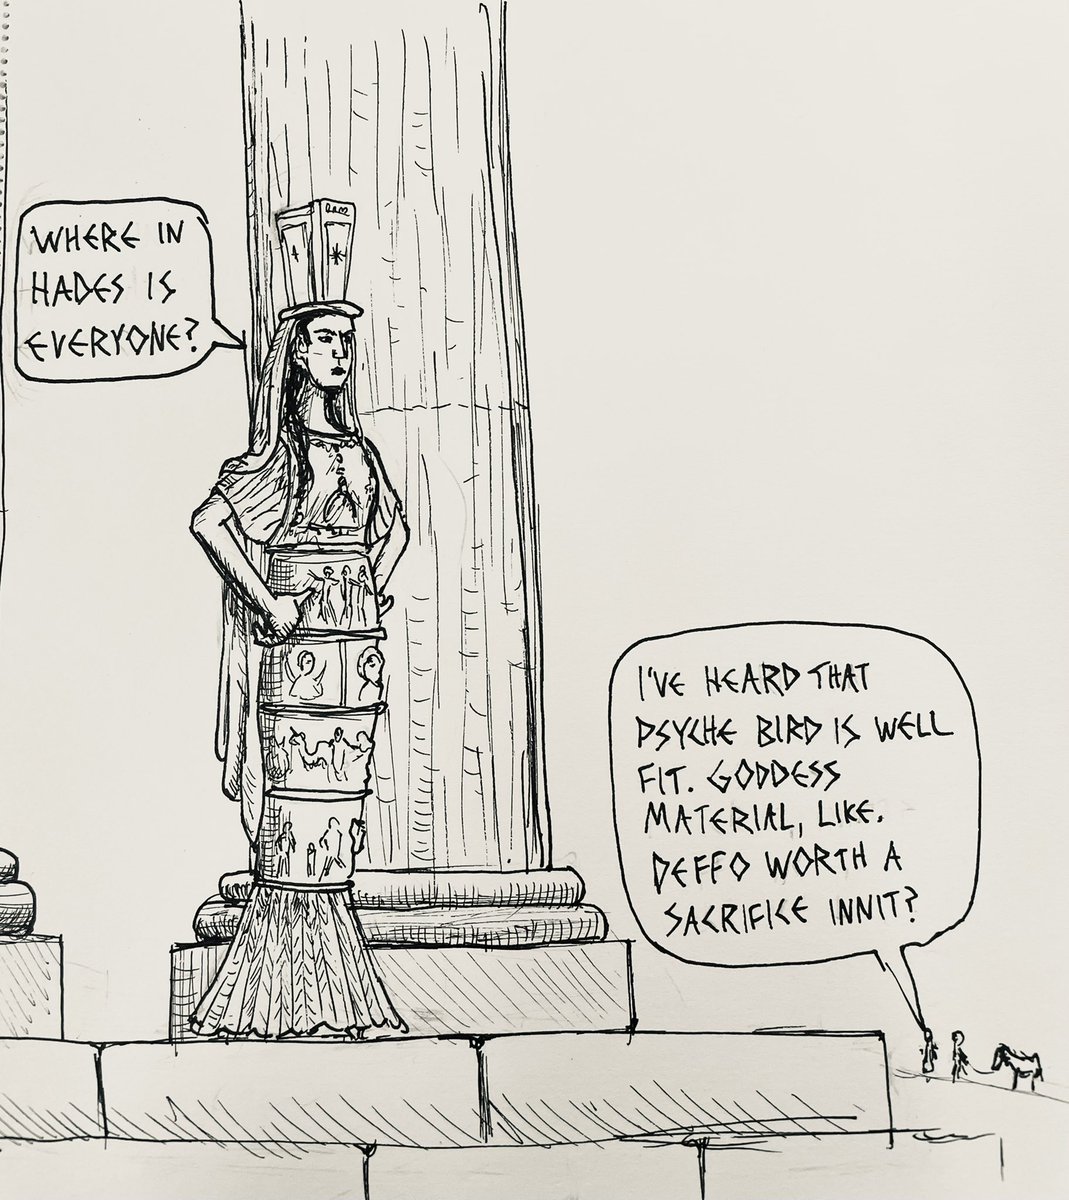 #ClassicsTober day 10: Psyche. The idol of Aphrodite at Aphrodisias ponders why her shrines are empty. Meanwhile, the simple folk of Caria sneak off to worship psyche.